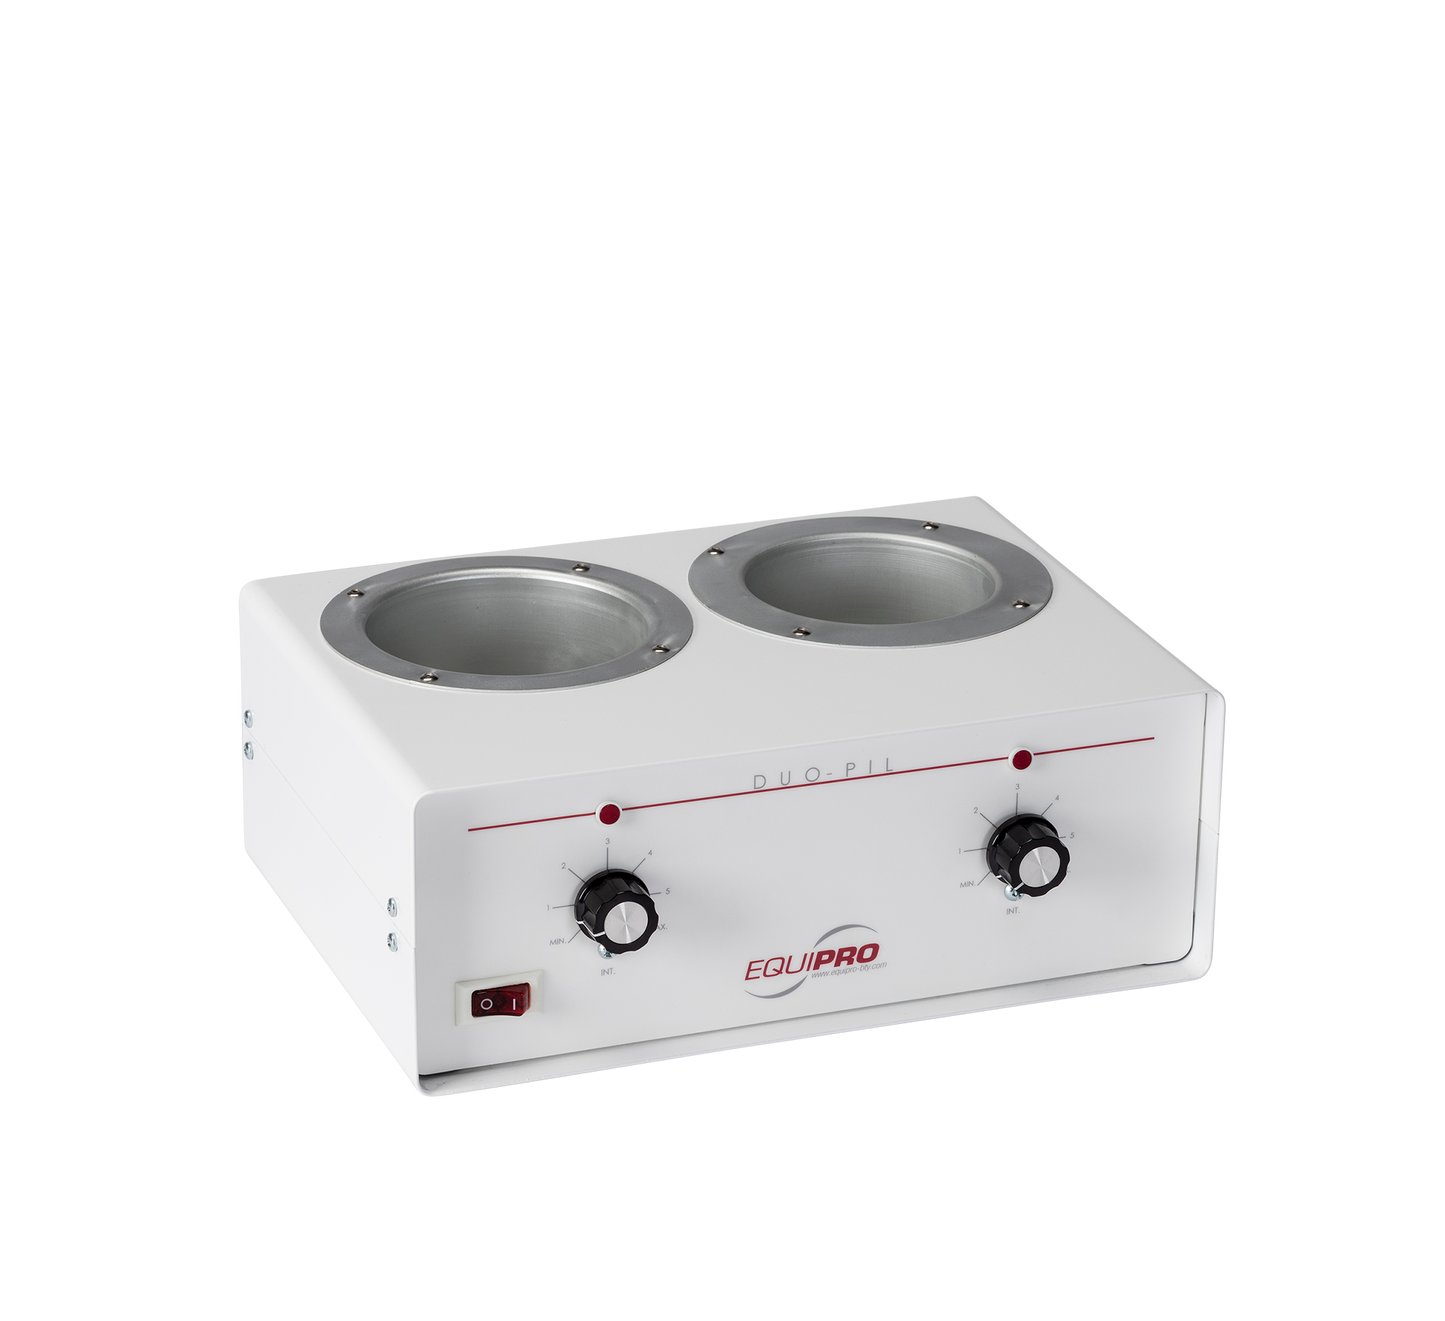 Double Wax Warmer from Equipro